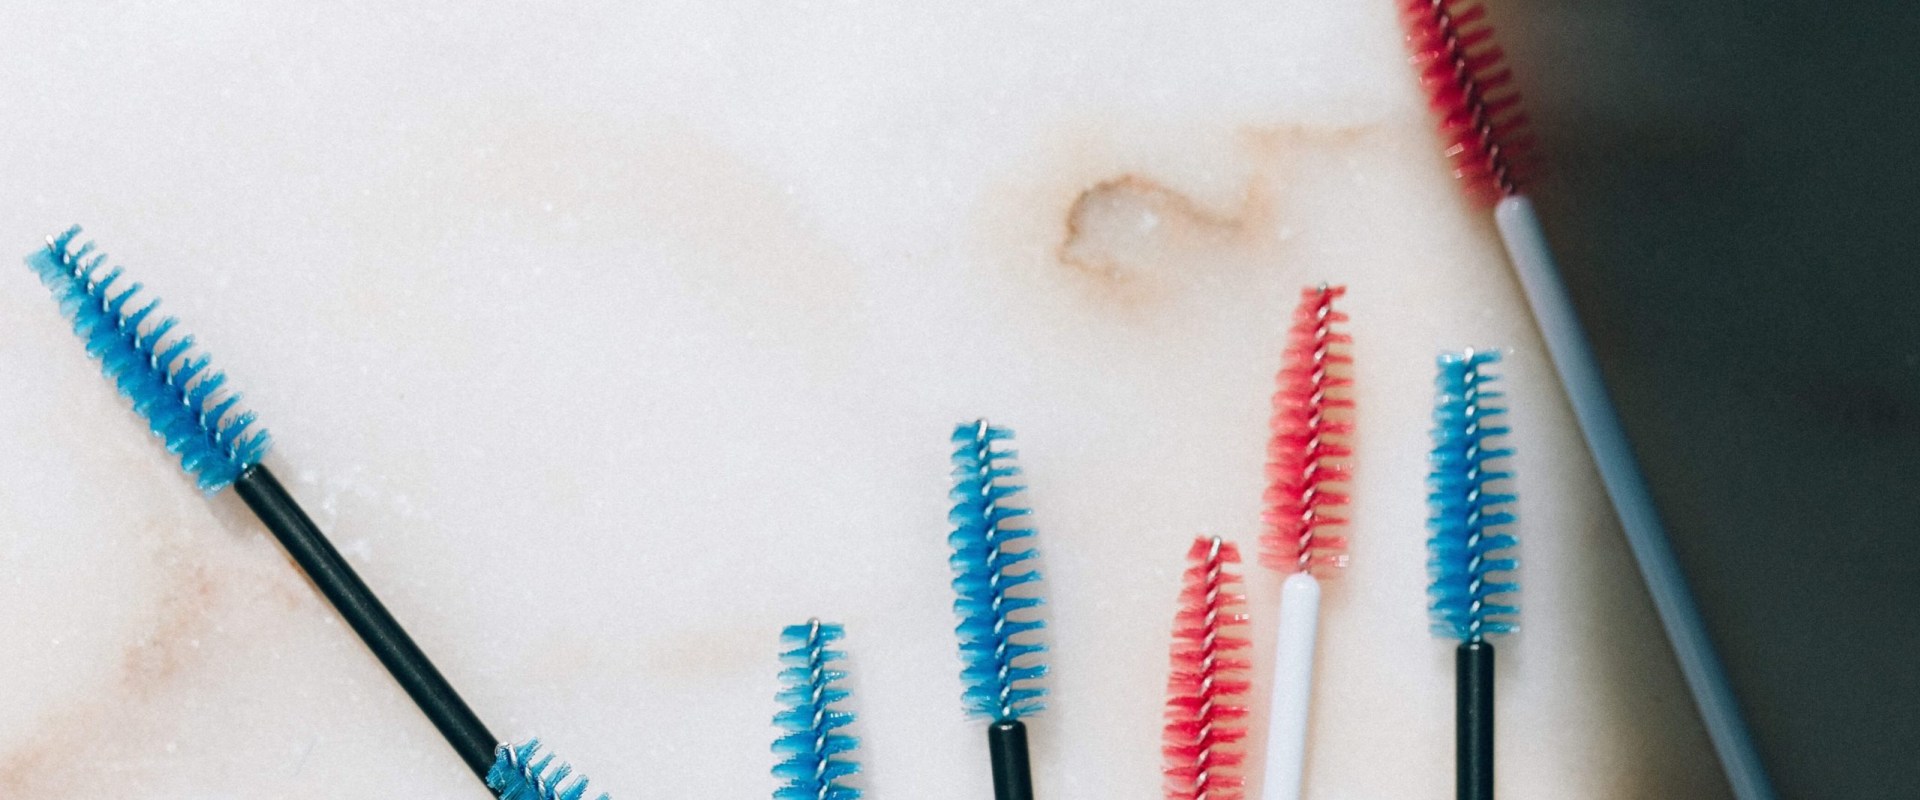 Floss and Interdental Cleaners: Everything You Need to Know